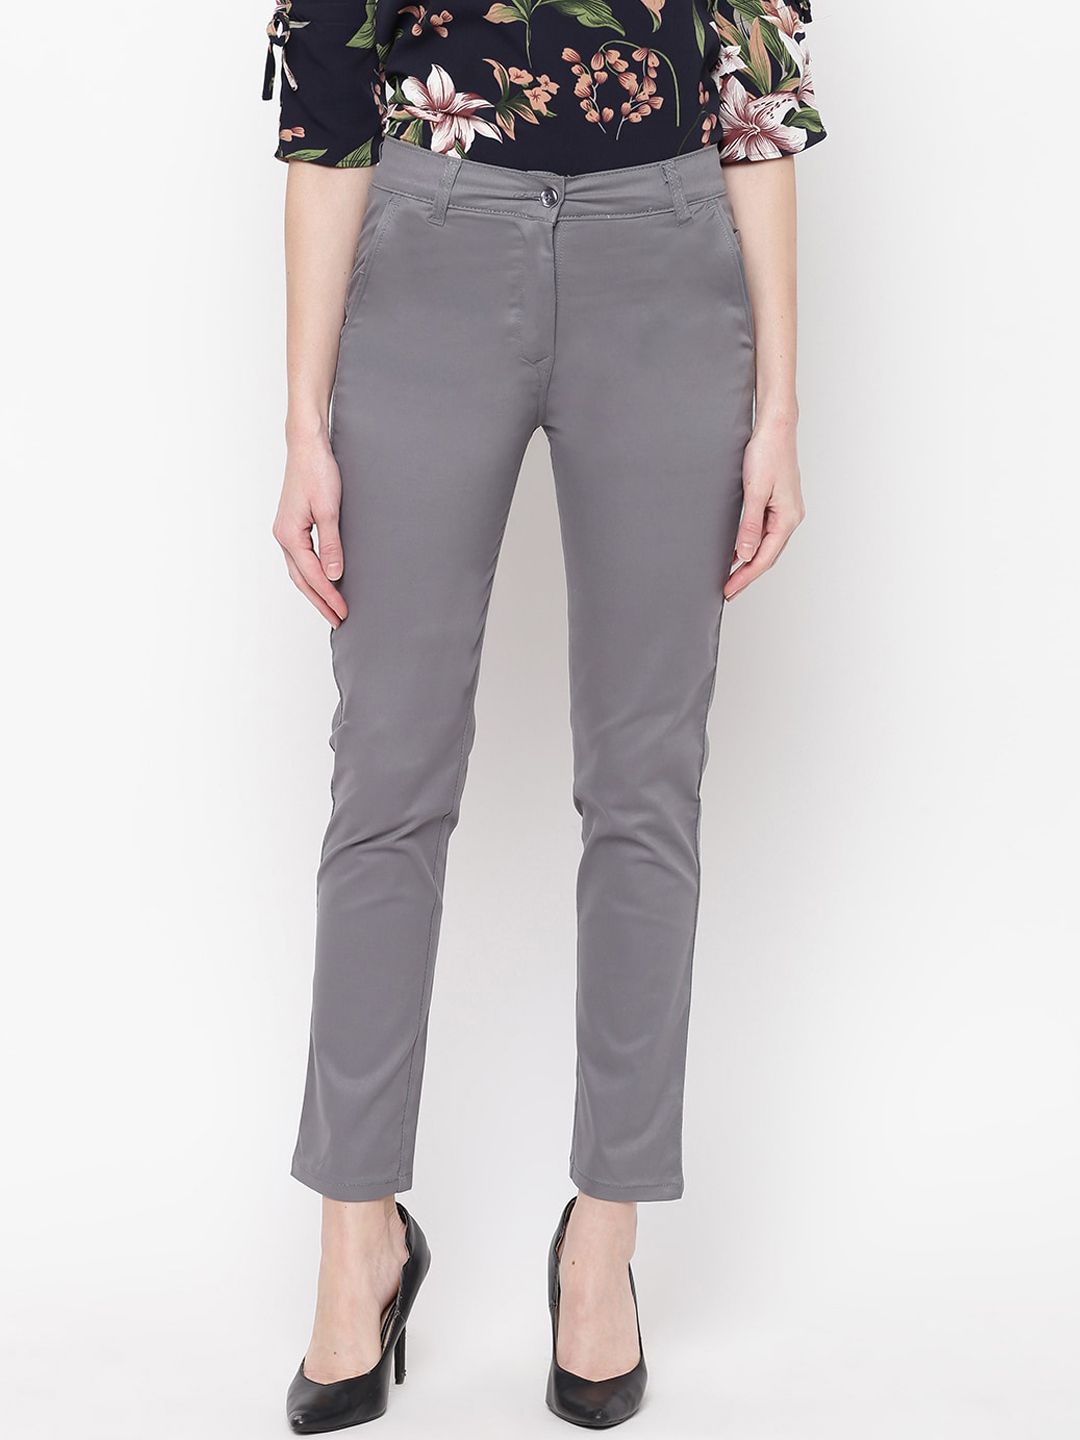 Mayra Women Grey Skinny Fit Solid Regular Trousers Price in India